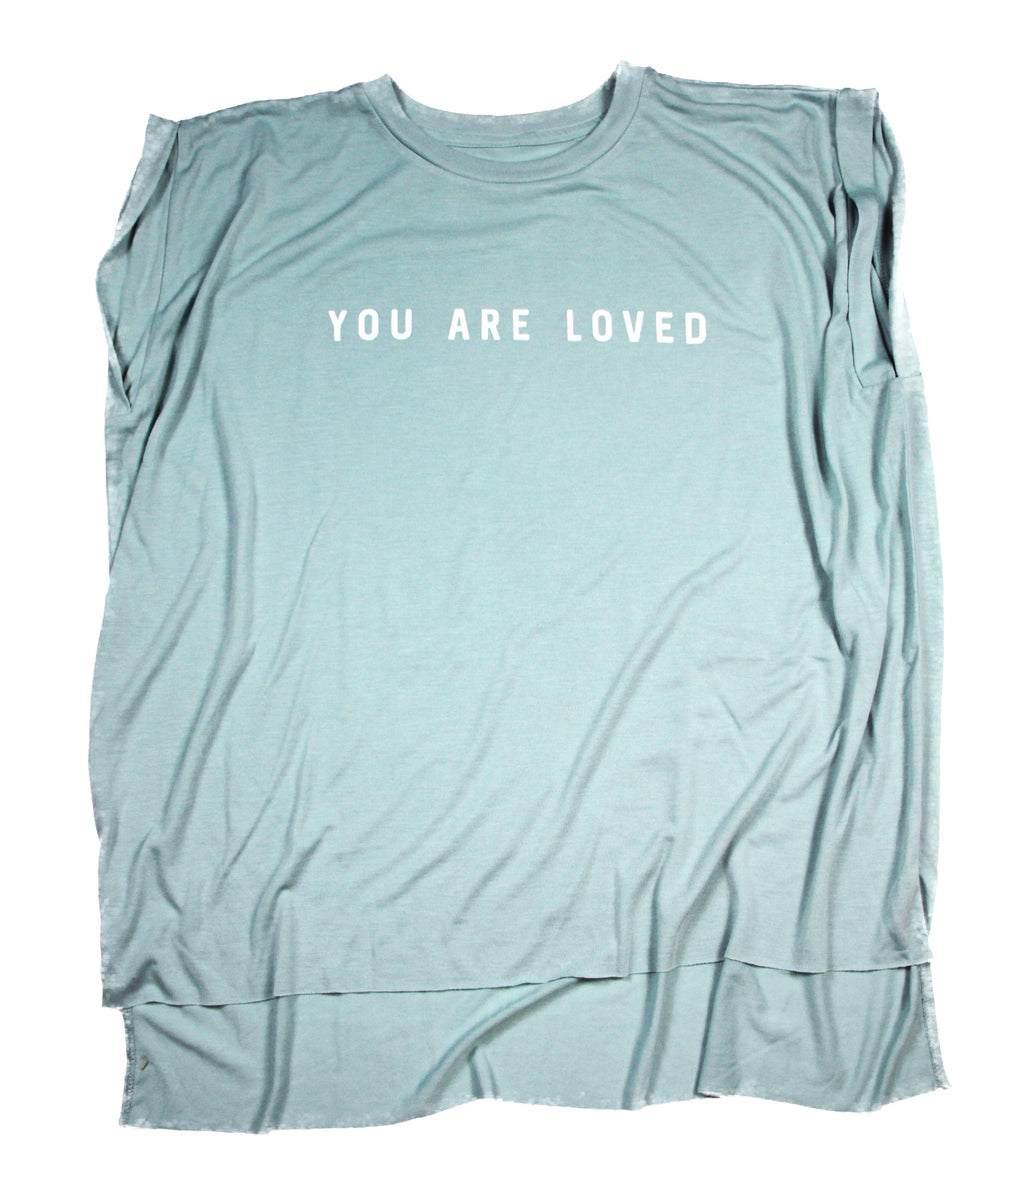 YOU ARE LOVED MINT WOMEN'S ROLLED CUFF MUSCLE T-SHIRT